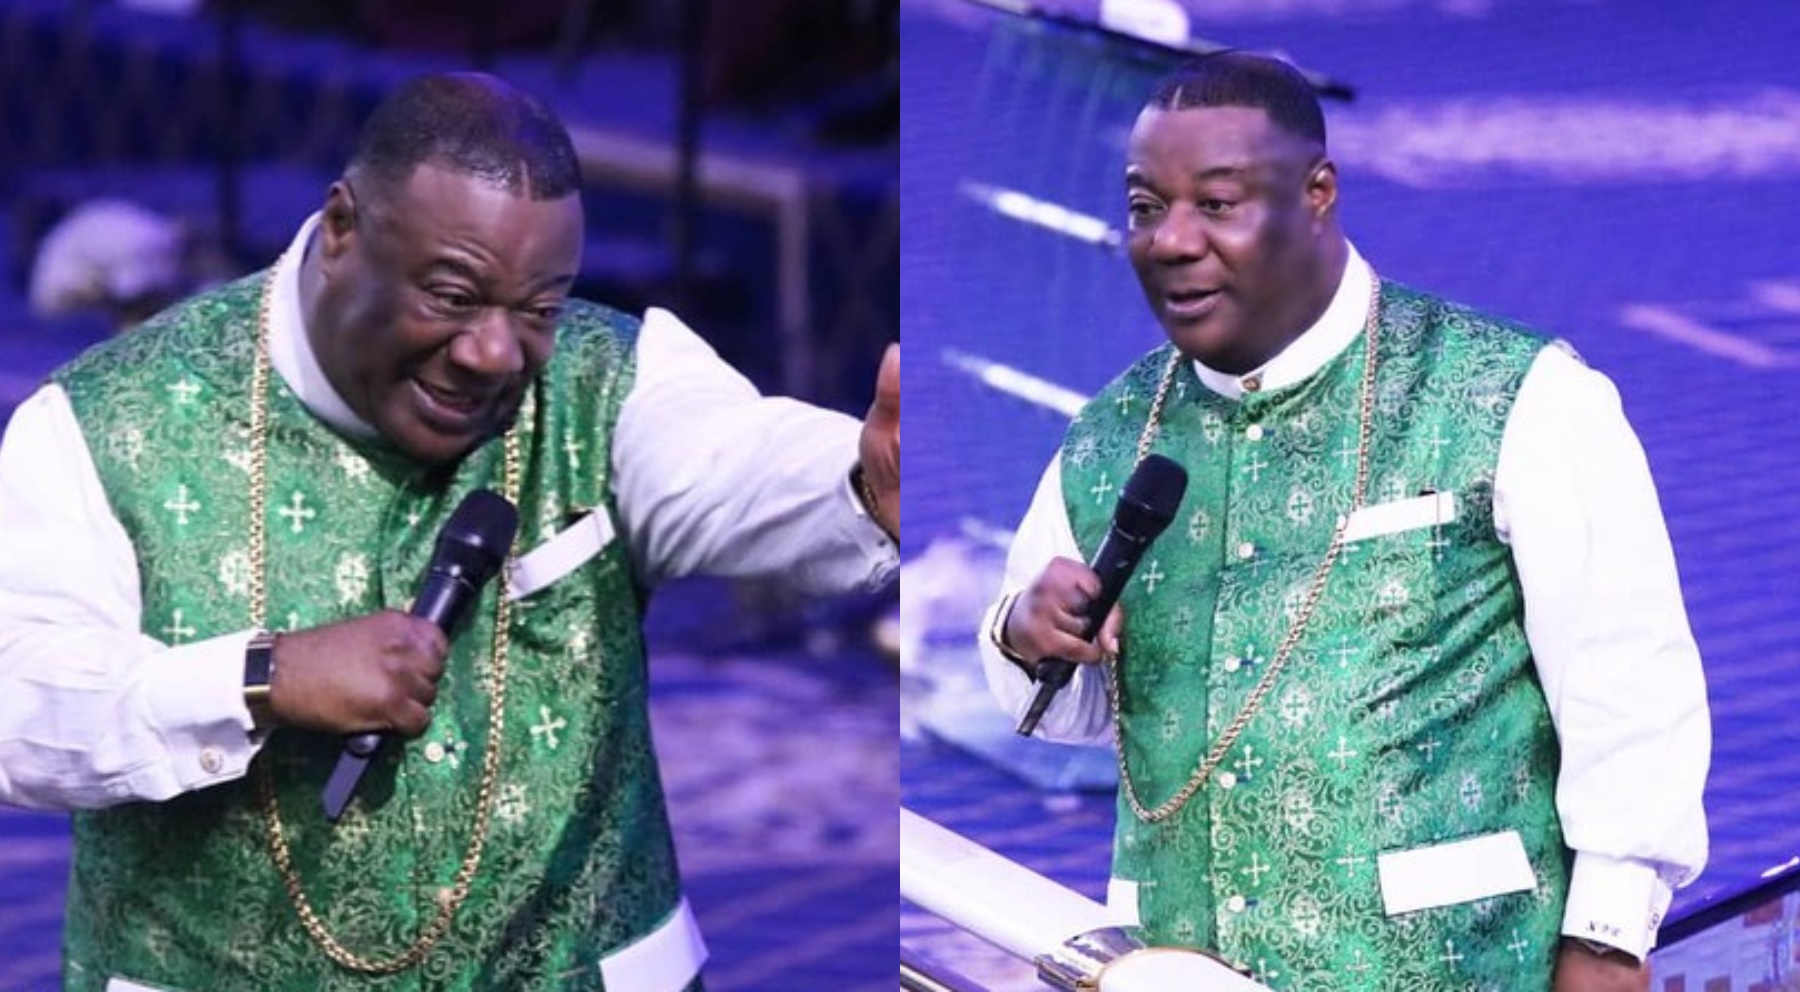 Archbishop Nicholas Duncan-Williams shows off 'smooth' dancing skills in a new video